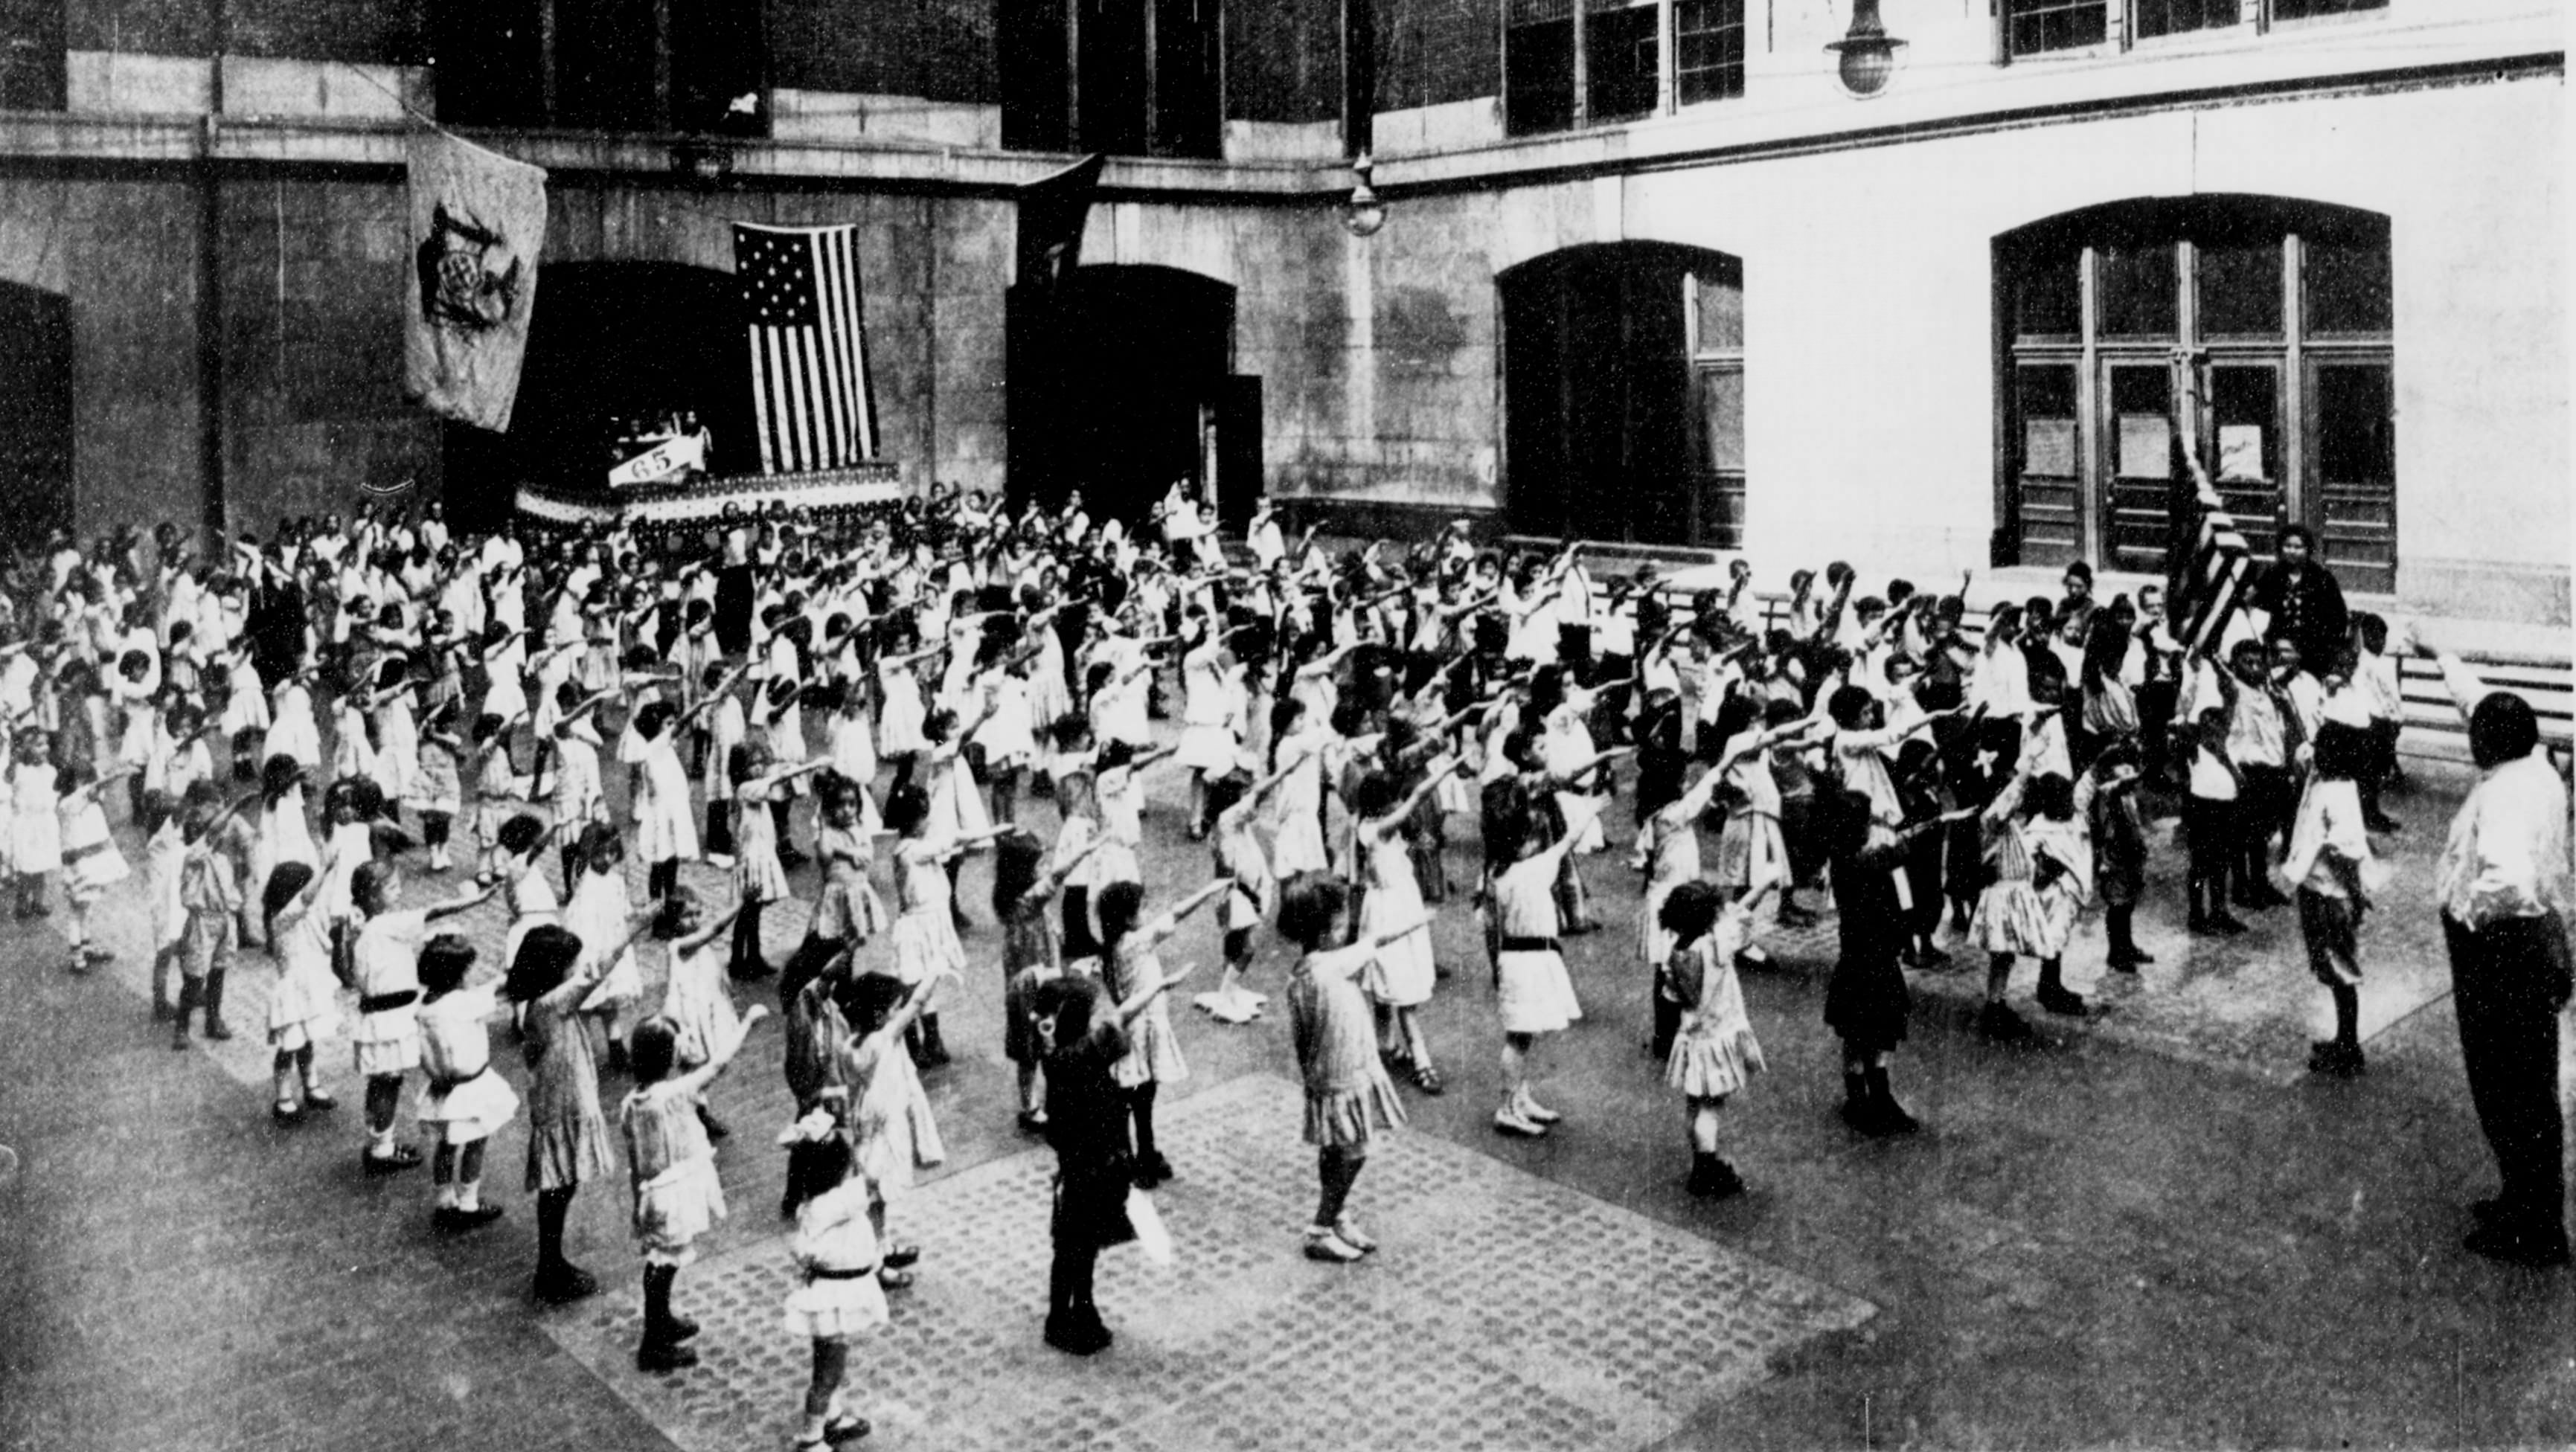 School children salute the flag in the US in 1915. This was known as the Bellamy salute, and was the same as the Nazi's salute well before the Nazi's existed. Once Germany became an enemy to the US, the Pledge of Allegiance salute was formally changed.